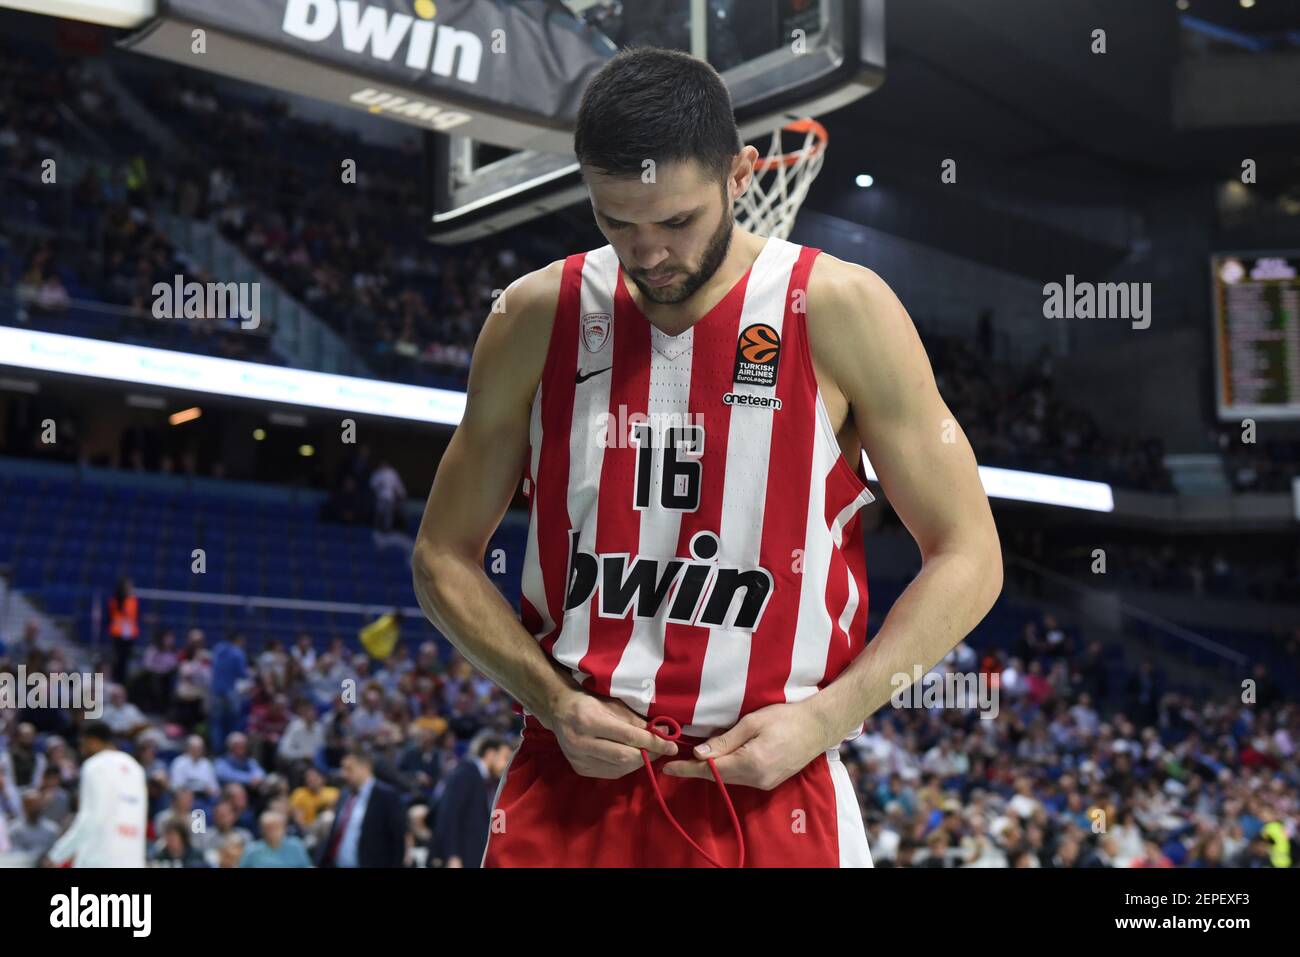 Kostas Papanikolaou, #16 of Olympiacos during the 2019/2020 Turkish  Airlines EuroLeague Regular Season Round 13 game between Real Madrid and  Olympiacos Piraeus at Wizink Center in Madrid, Spain on December 12, 2019. (